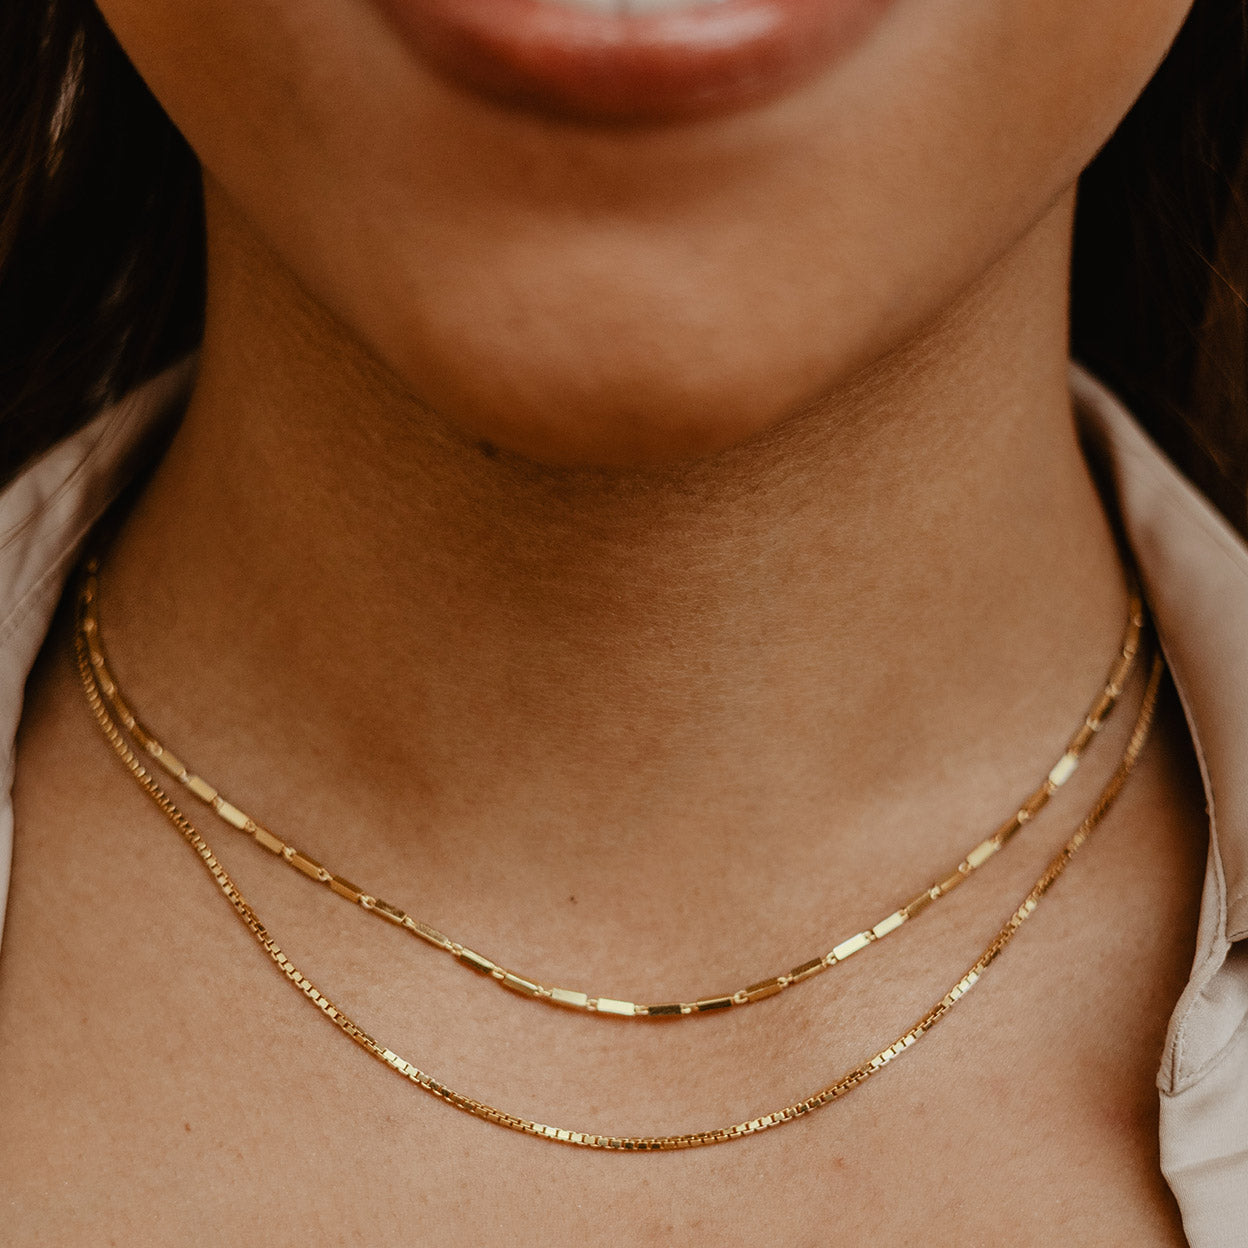 Women's Layered Box Chain Necklace